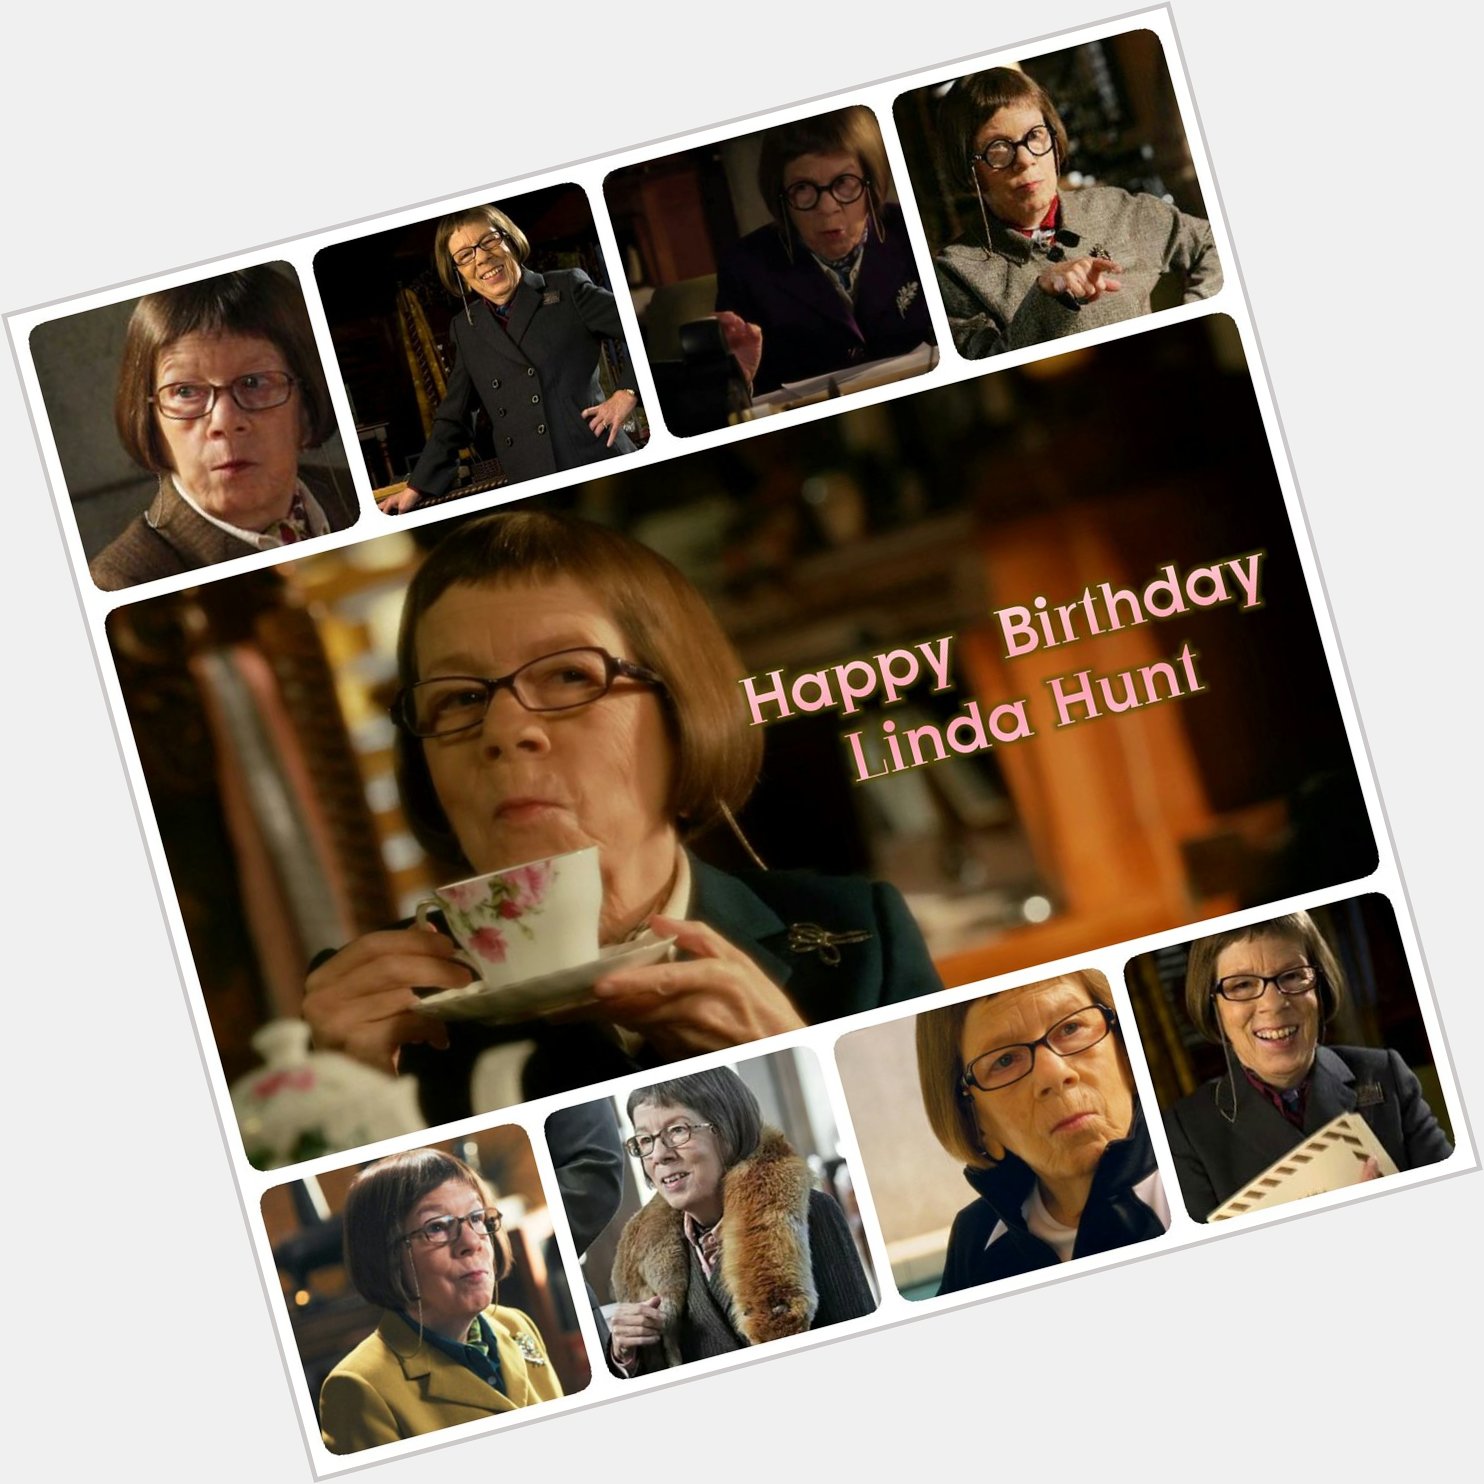 Happy Birthday Linda Hunt!! 
Hope you have a great day    